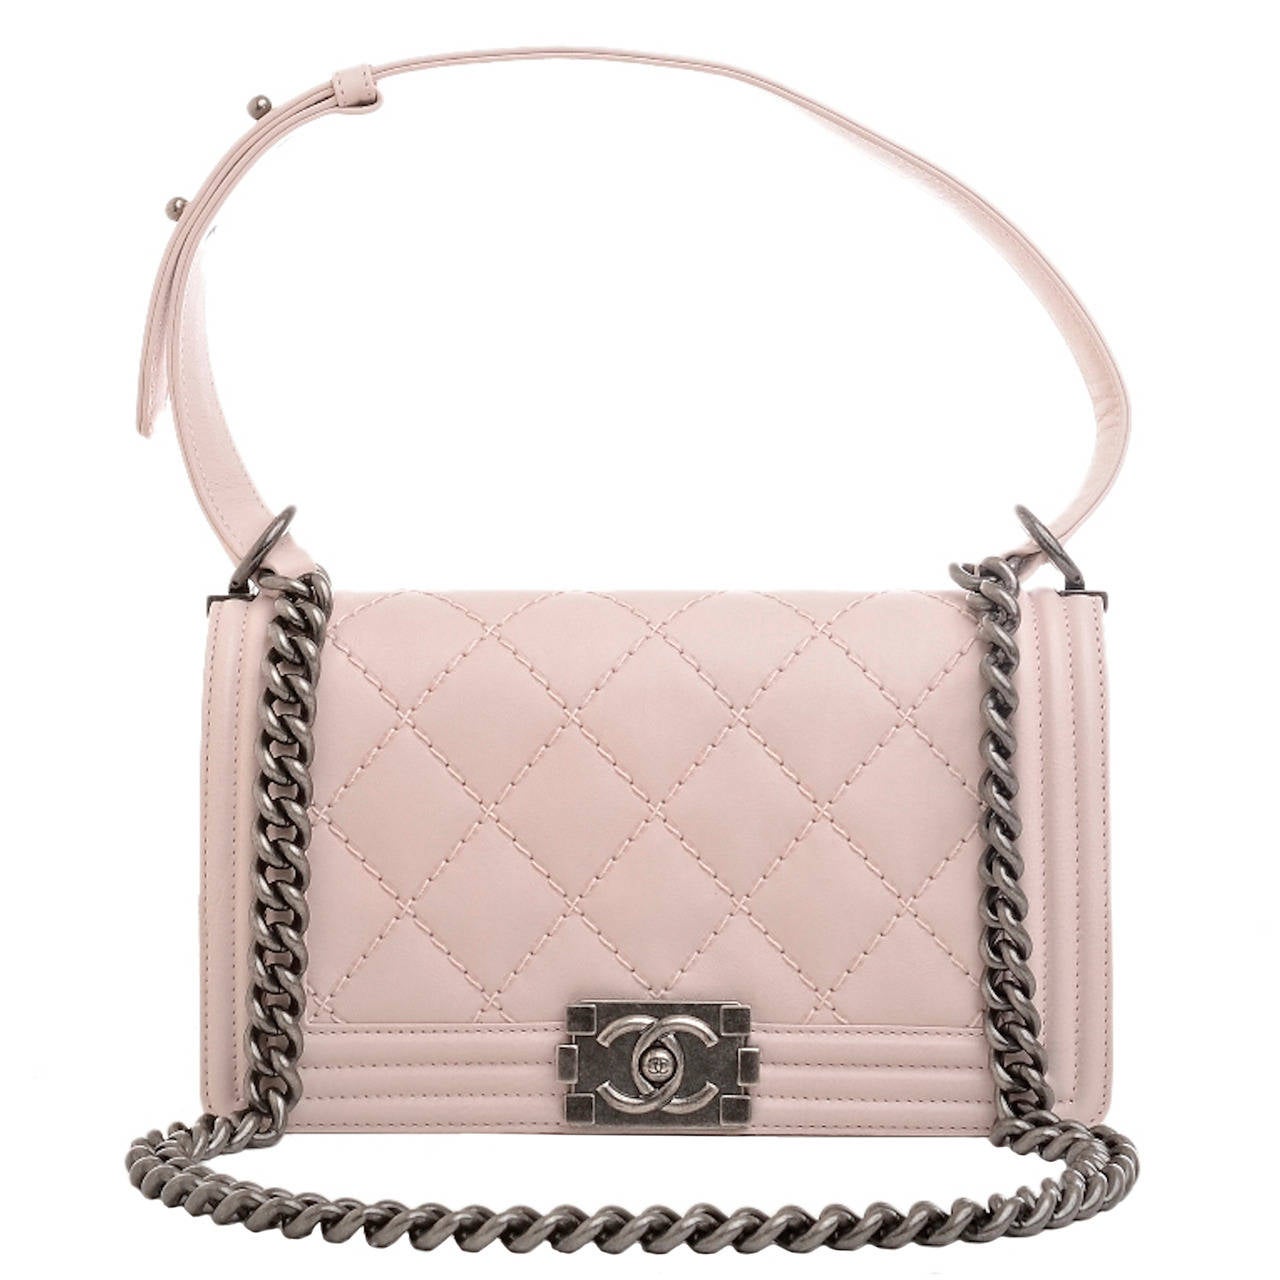 Chanel Baby Pink Quilted Medium Boy Bag at 1stdibs